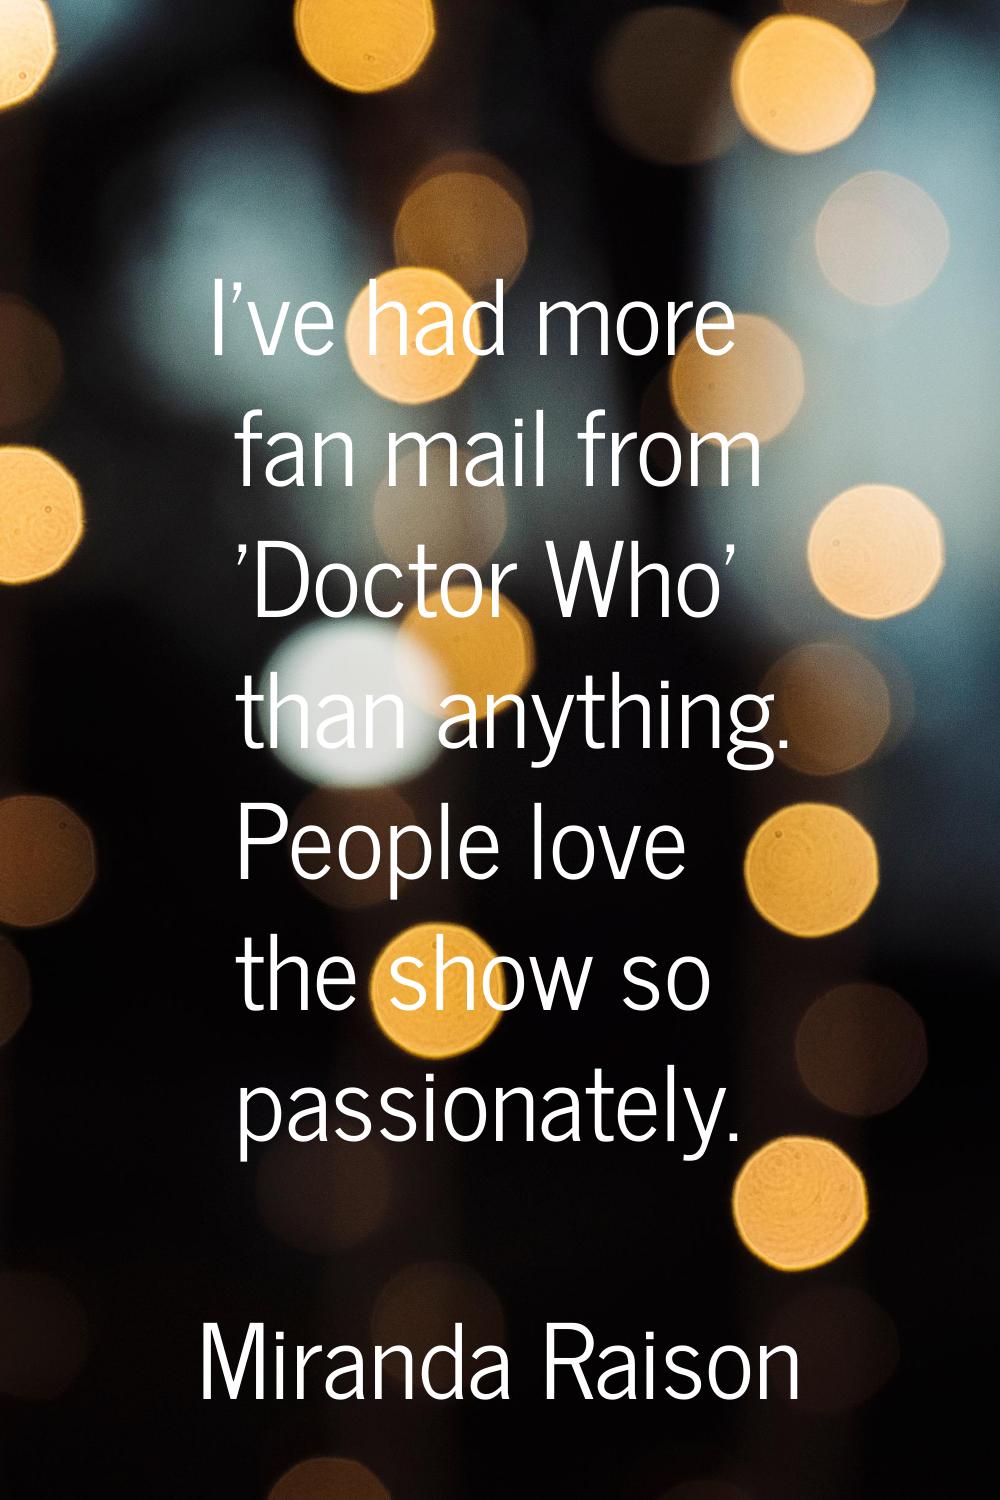 I've had more fan mail from 'Doctor Who' than anything. People love the show so passionately.